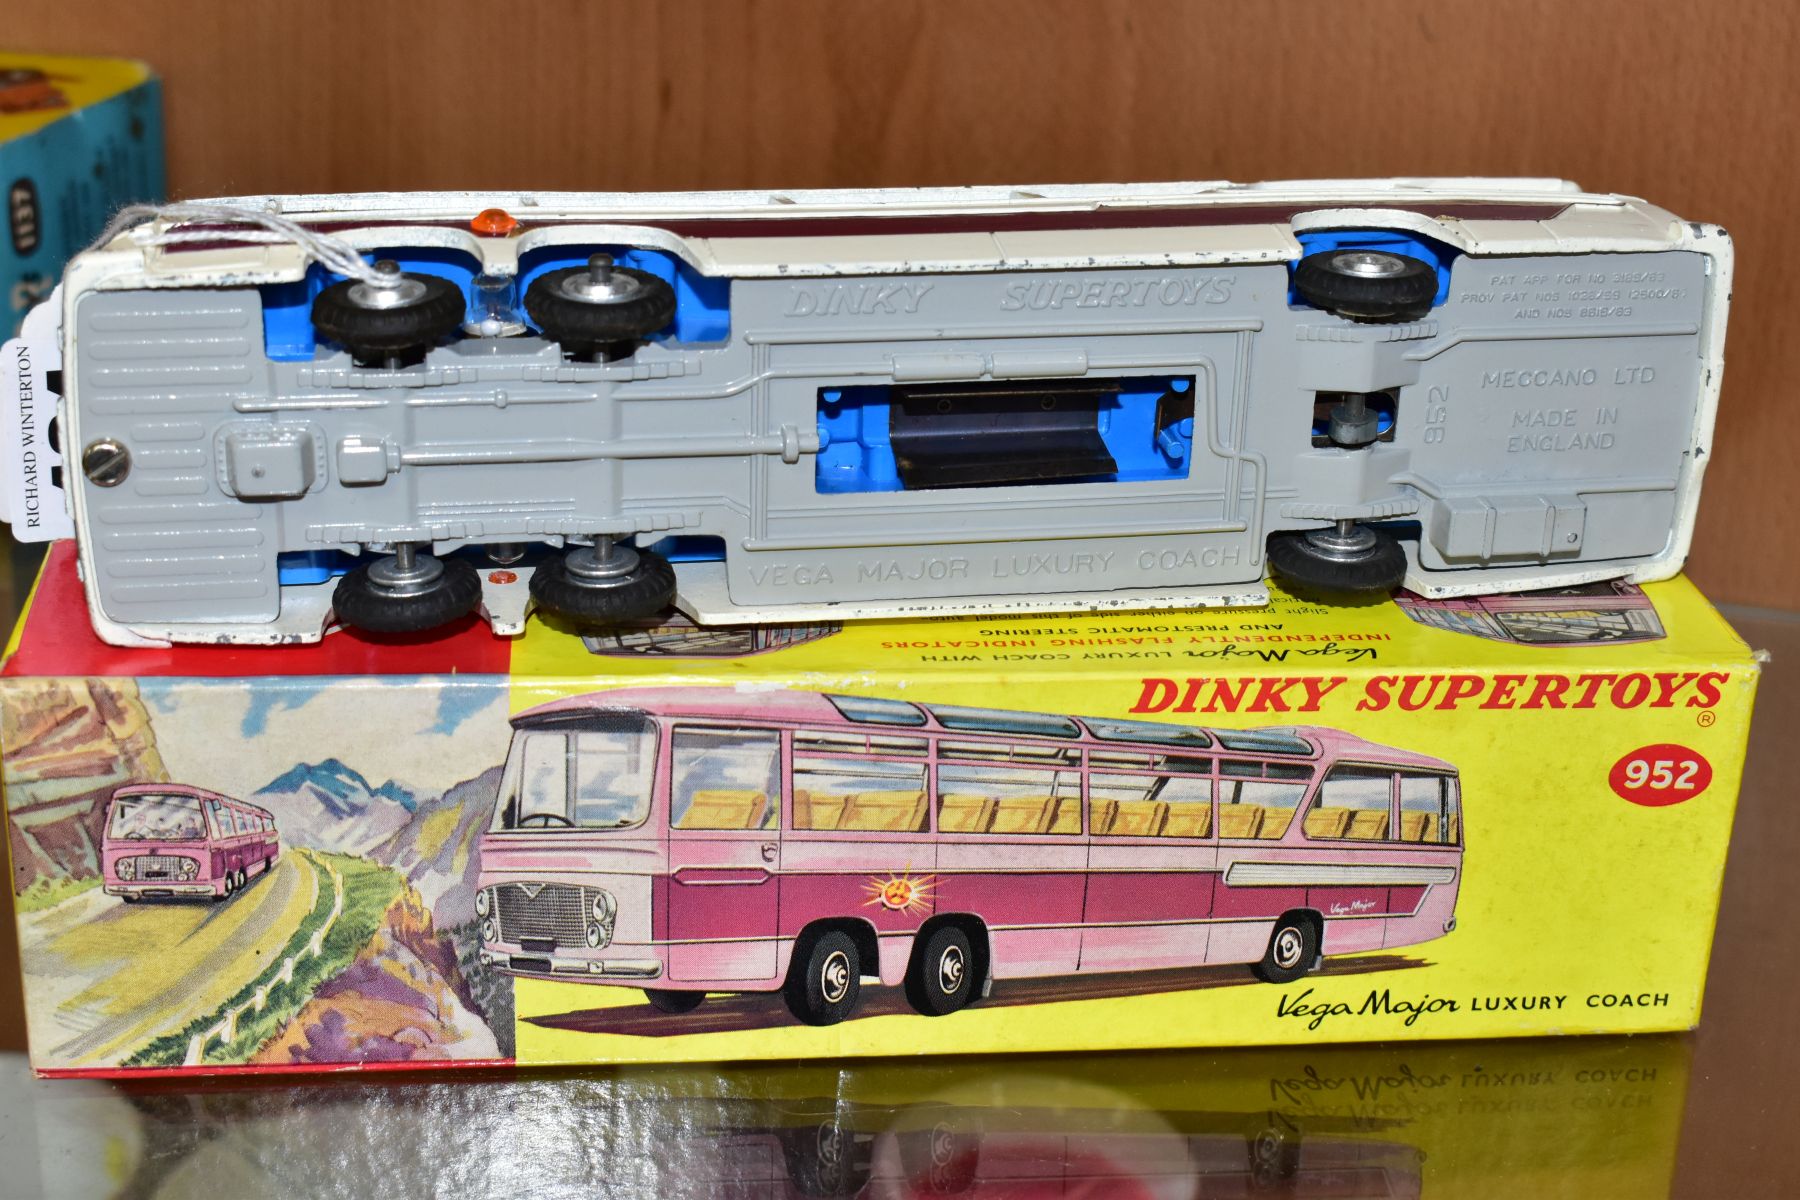 A BOXED DINKY SUPERTOYS BEDFORD VAN DUPLE VEGA MAJOR LUXURY COACH, No. 952, version with flashing - Image 6 of 7